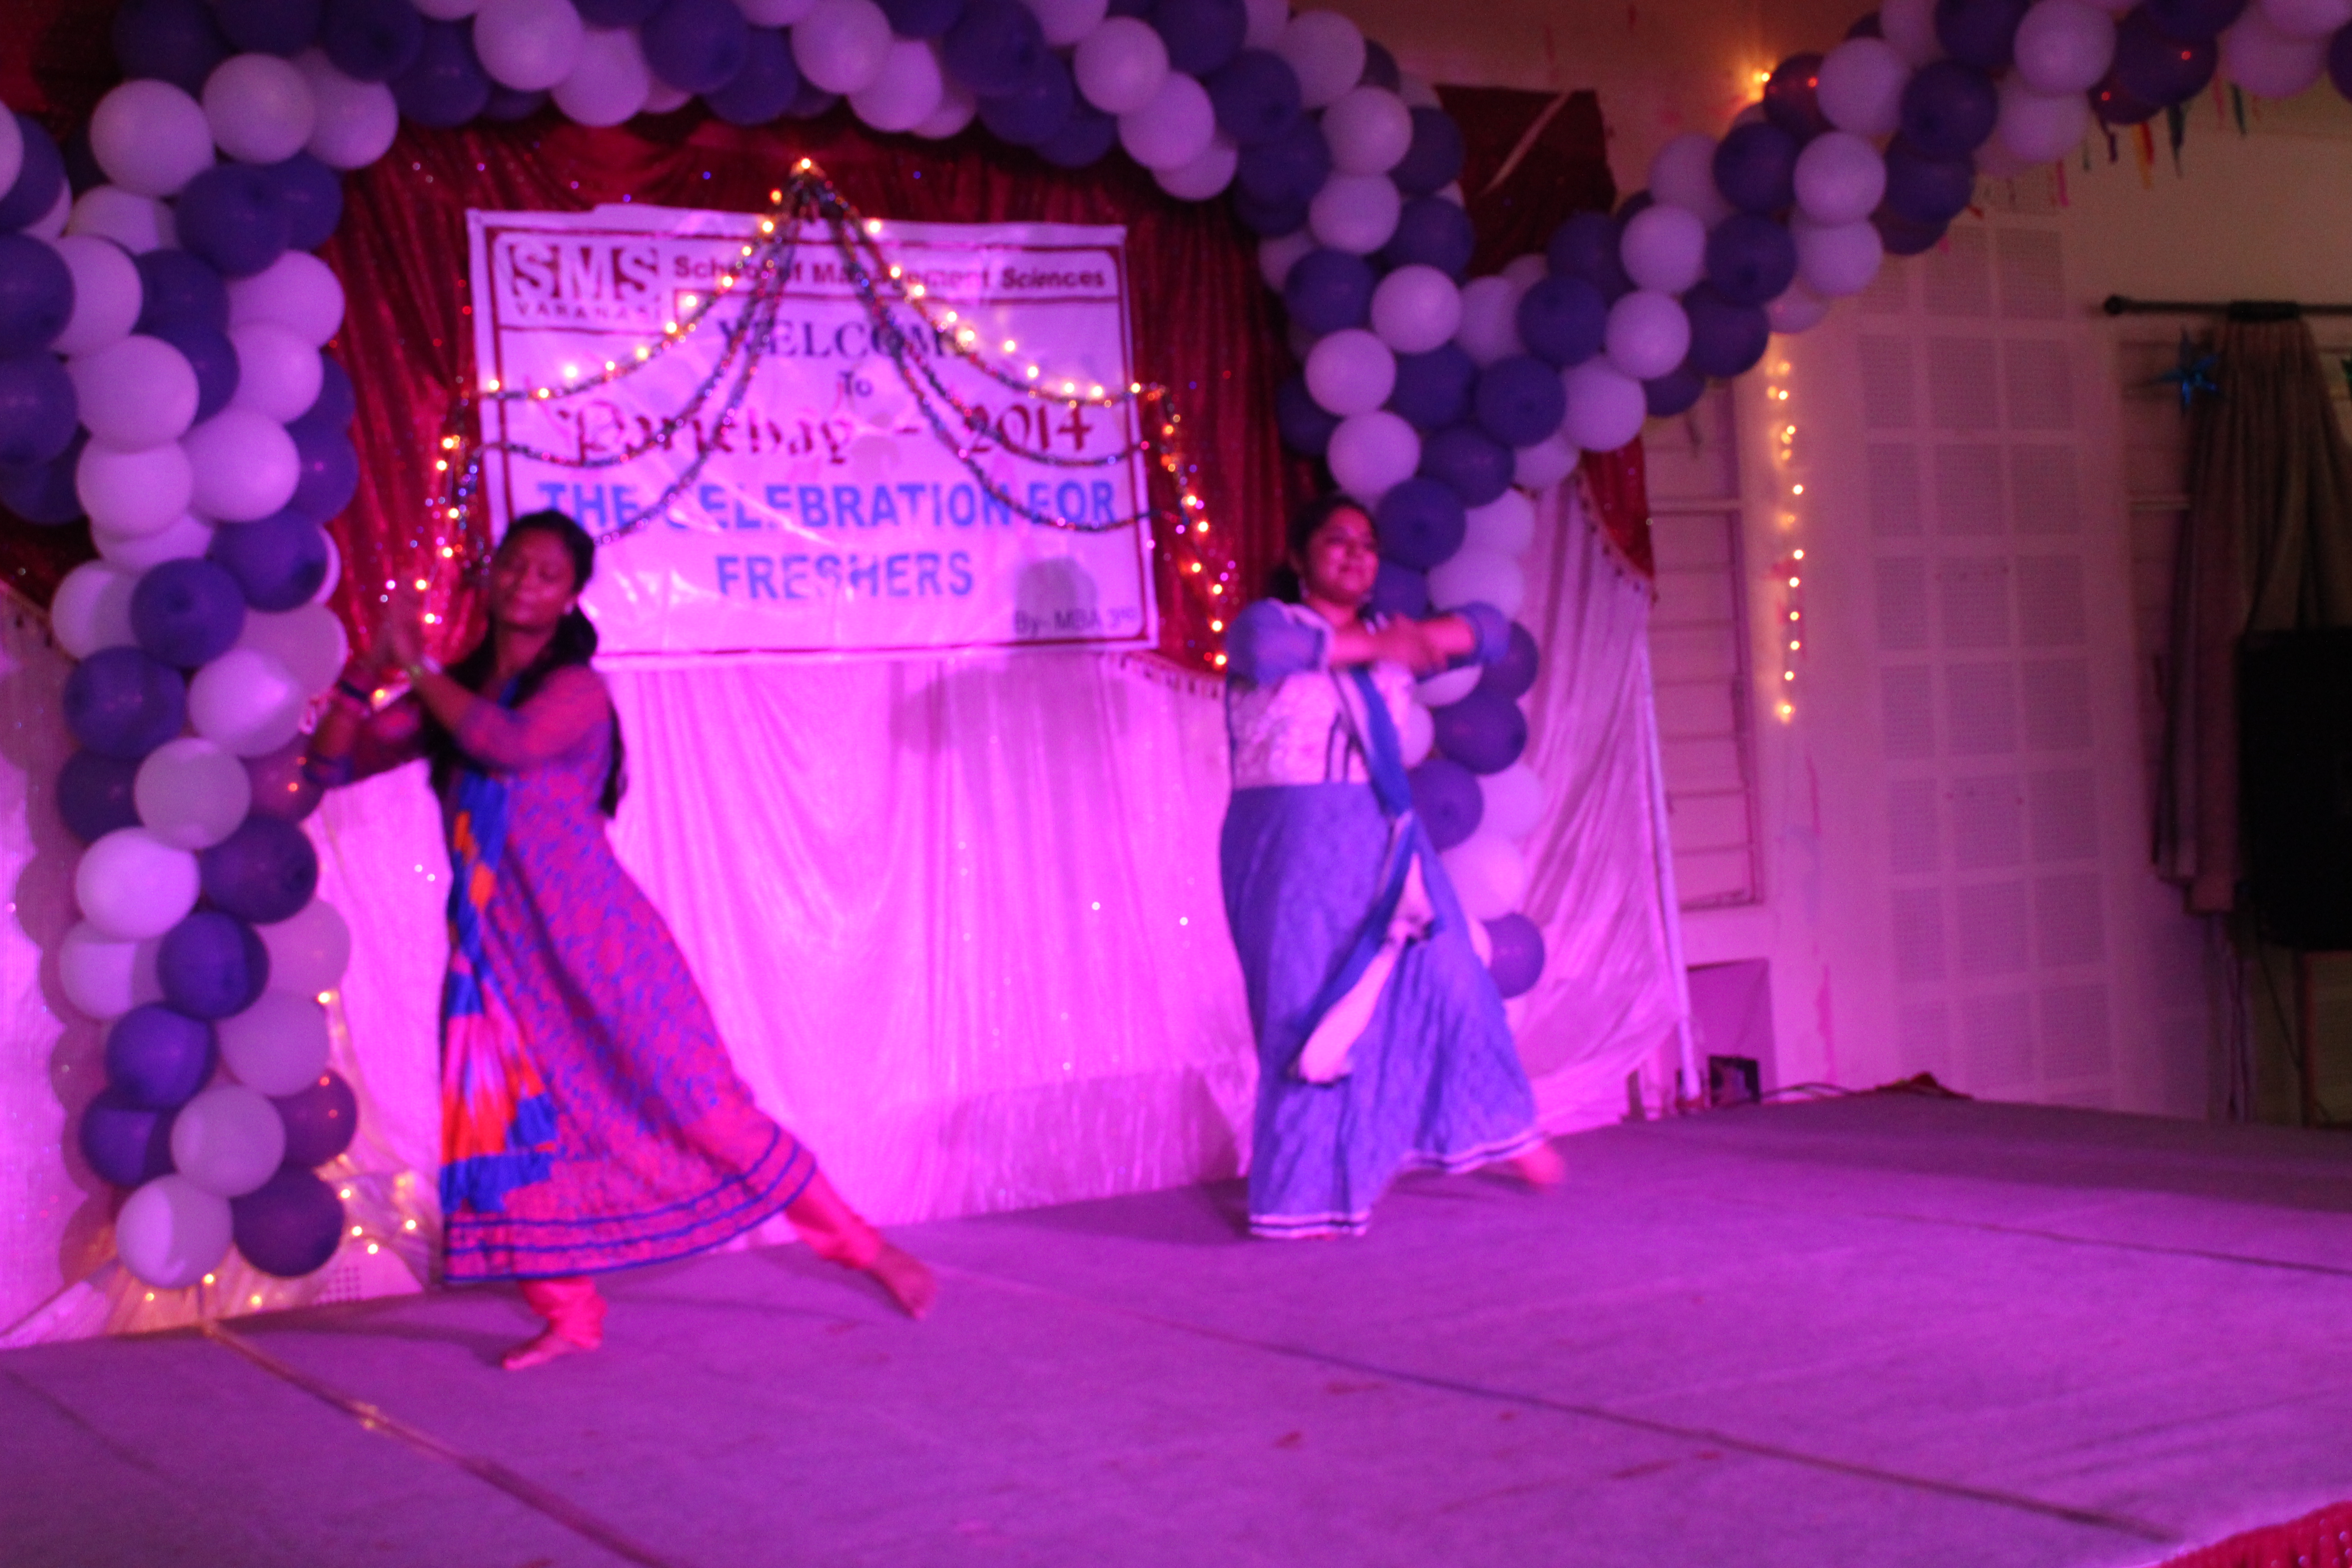  Parichay 2014  MBA Fresher  s welcome party  SMS Varanasi 